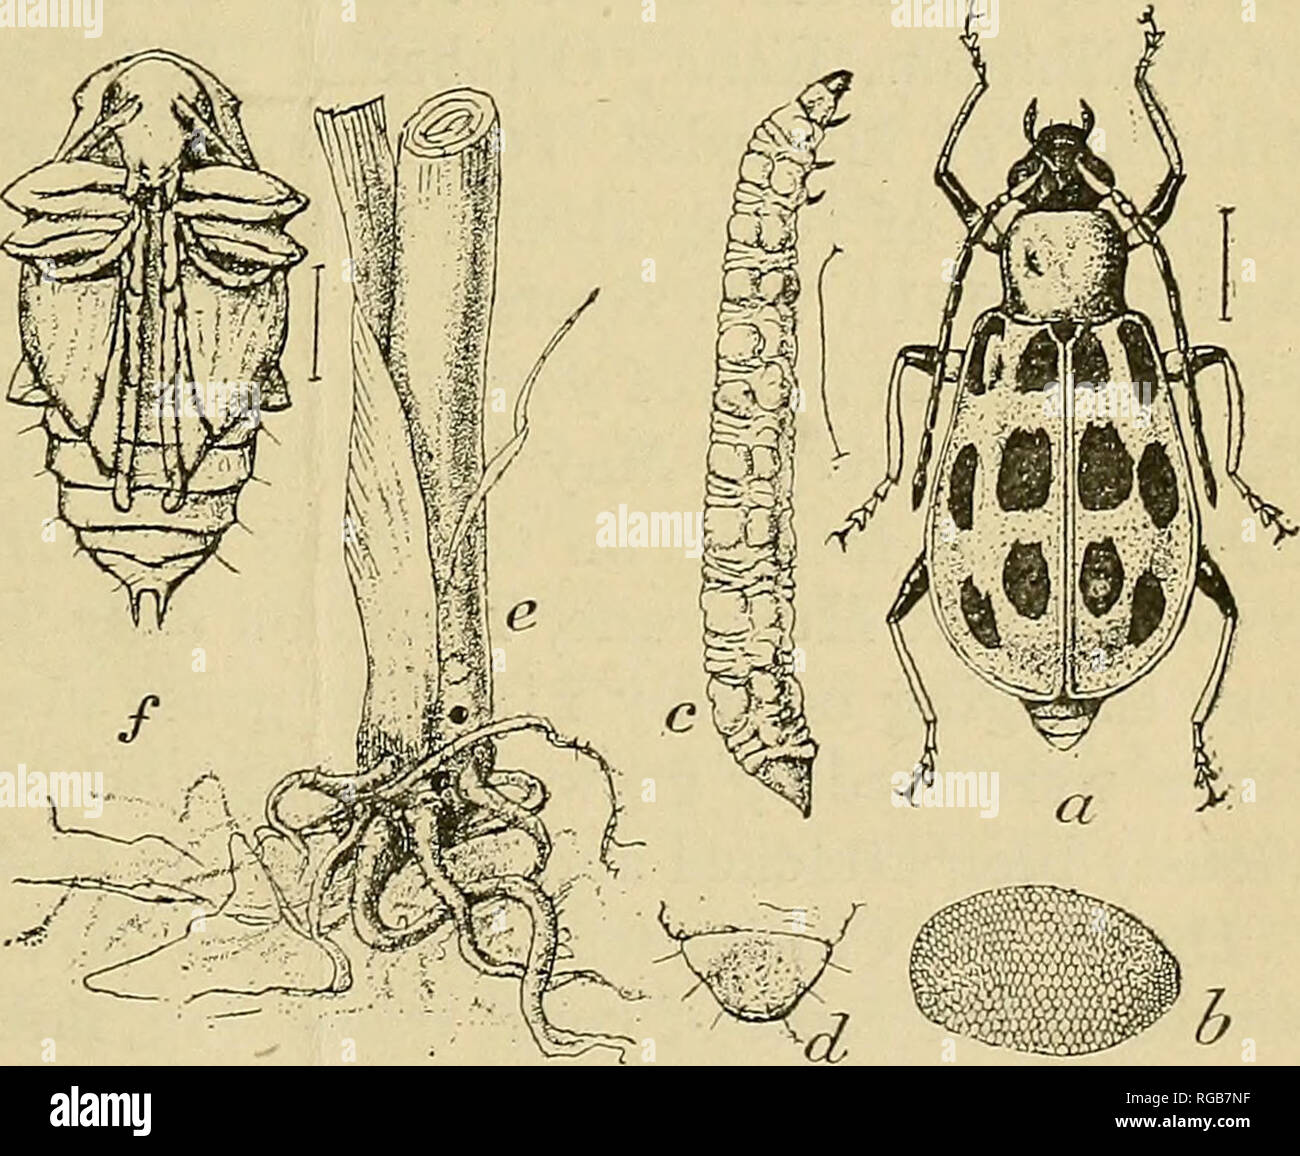 . Bulletin of the U.S. Department of Agriculture. Agriculture; Agriculture. THE SOUTHERN CORN ROOTWORM, OR BUDWORM. By F. M. Webster, In Charge of Cereal and Forage Insect Investigations. DISTRIBUTION. The parent of the southern corn rootworm (Diabrotica duodecim- piinctata Oliv.), or, as it is often termed, the budworm, is a yellow or greenish-yellow beetle having 12 black spots on the back, as shown in figure 1, • a, from which its specific name, meaning &quot; 12-spotted,&quot; is derived. It is closely allied to the almost equally common striped cucumber beetle {Dia- brotica vittata Fab.), Stock Photo